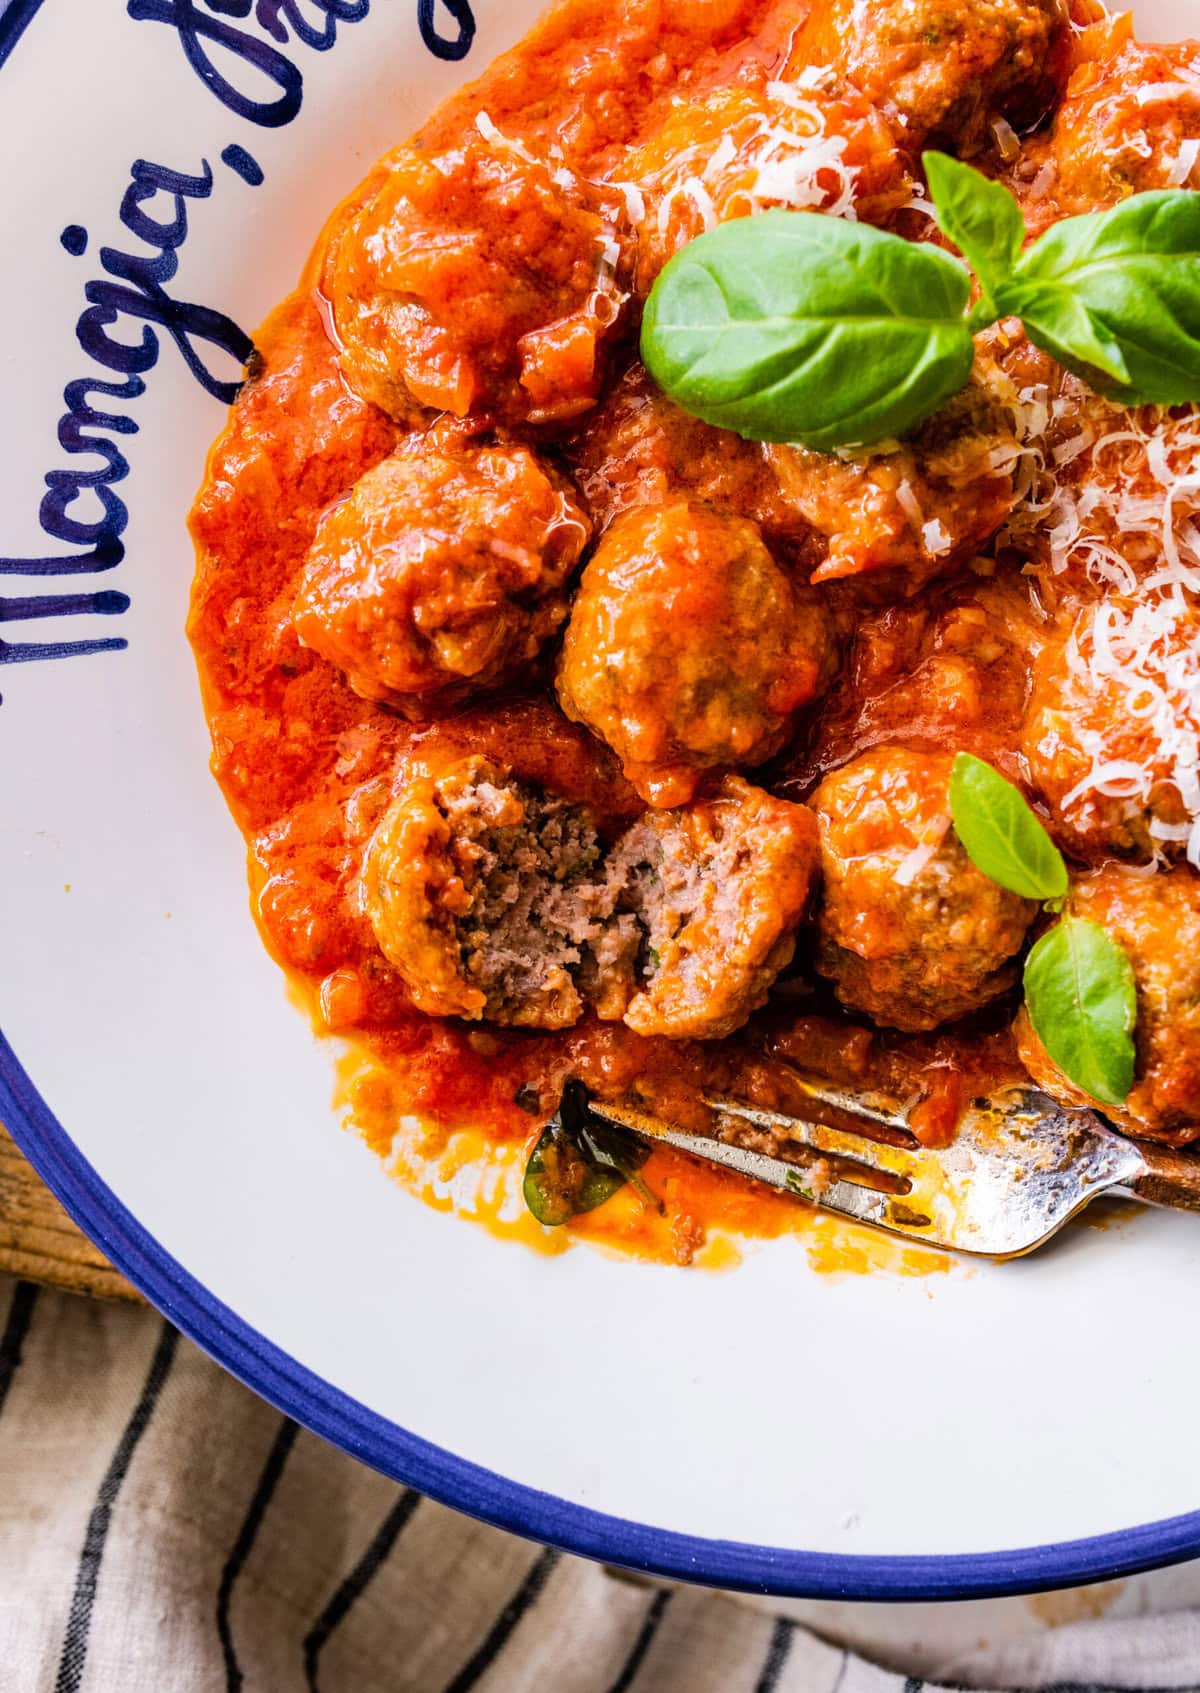 white Italian style bowl with the prepared meatballs in sauce with parmigiano cheese on top and fresh basil leaves. Tender meatballs cut in half to show tender interior.